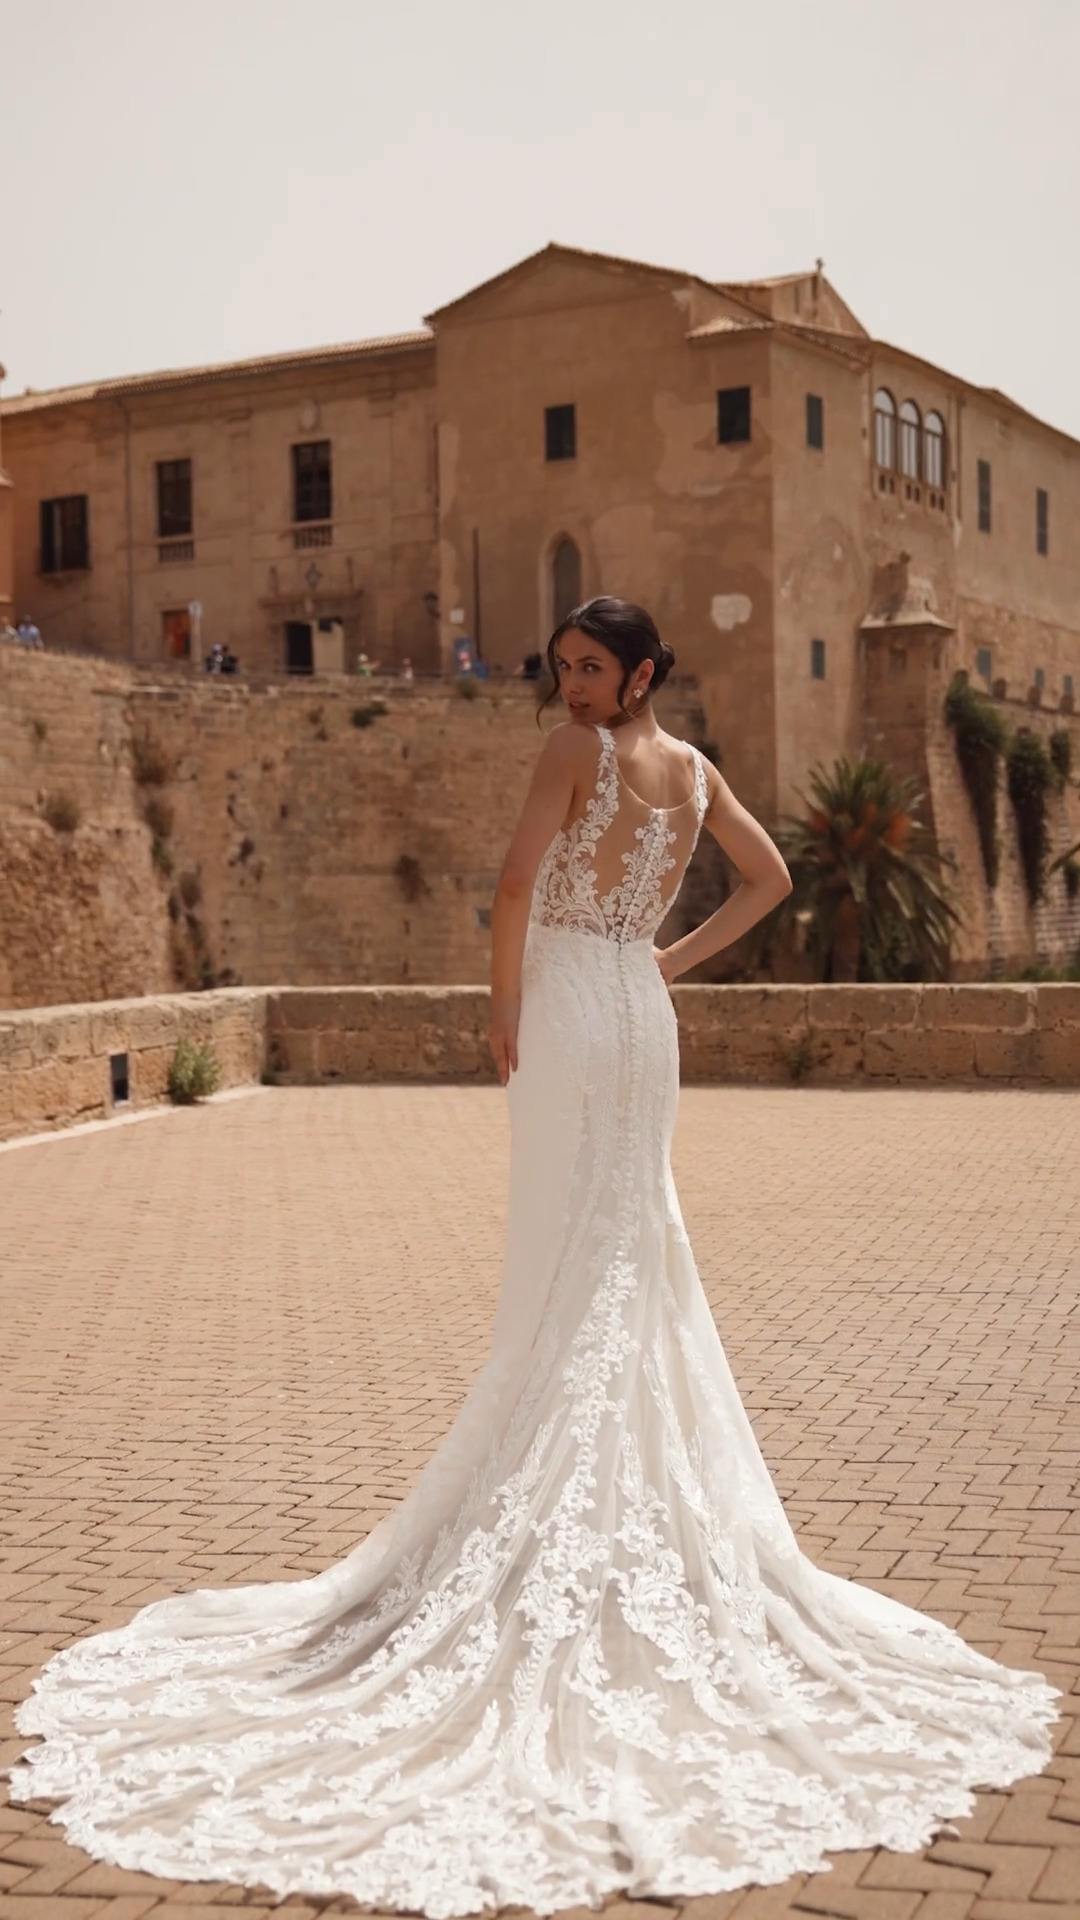 Bride Wearing A Fitted Crepe Wedding Dress With Illusion Back and Cutout Lace Train